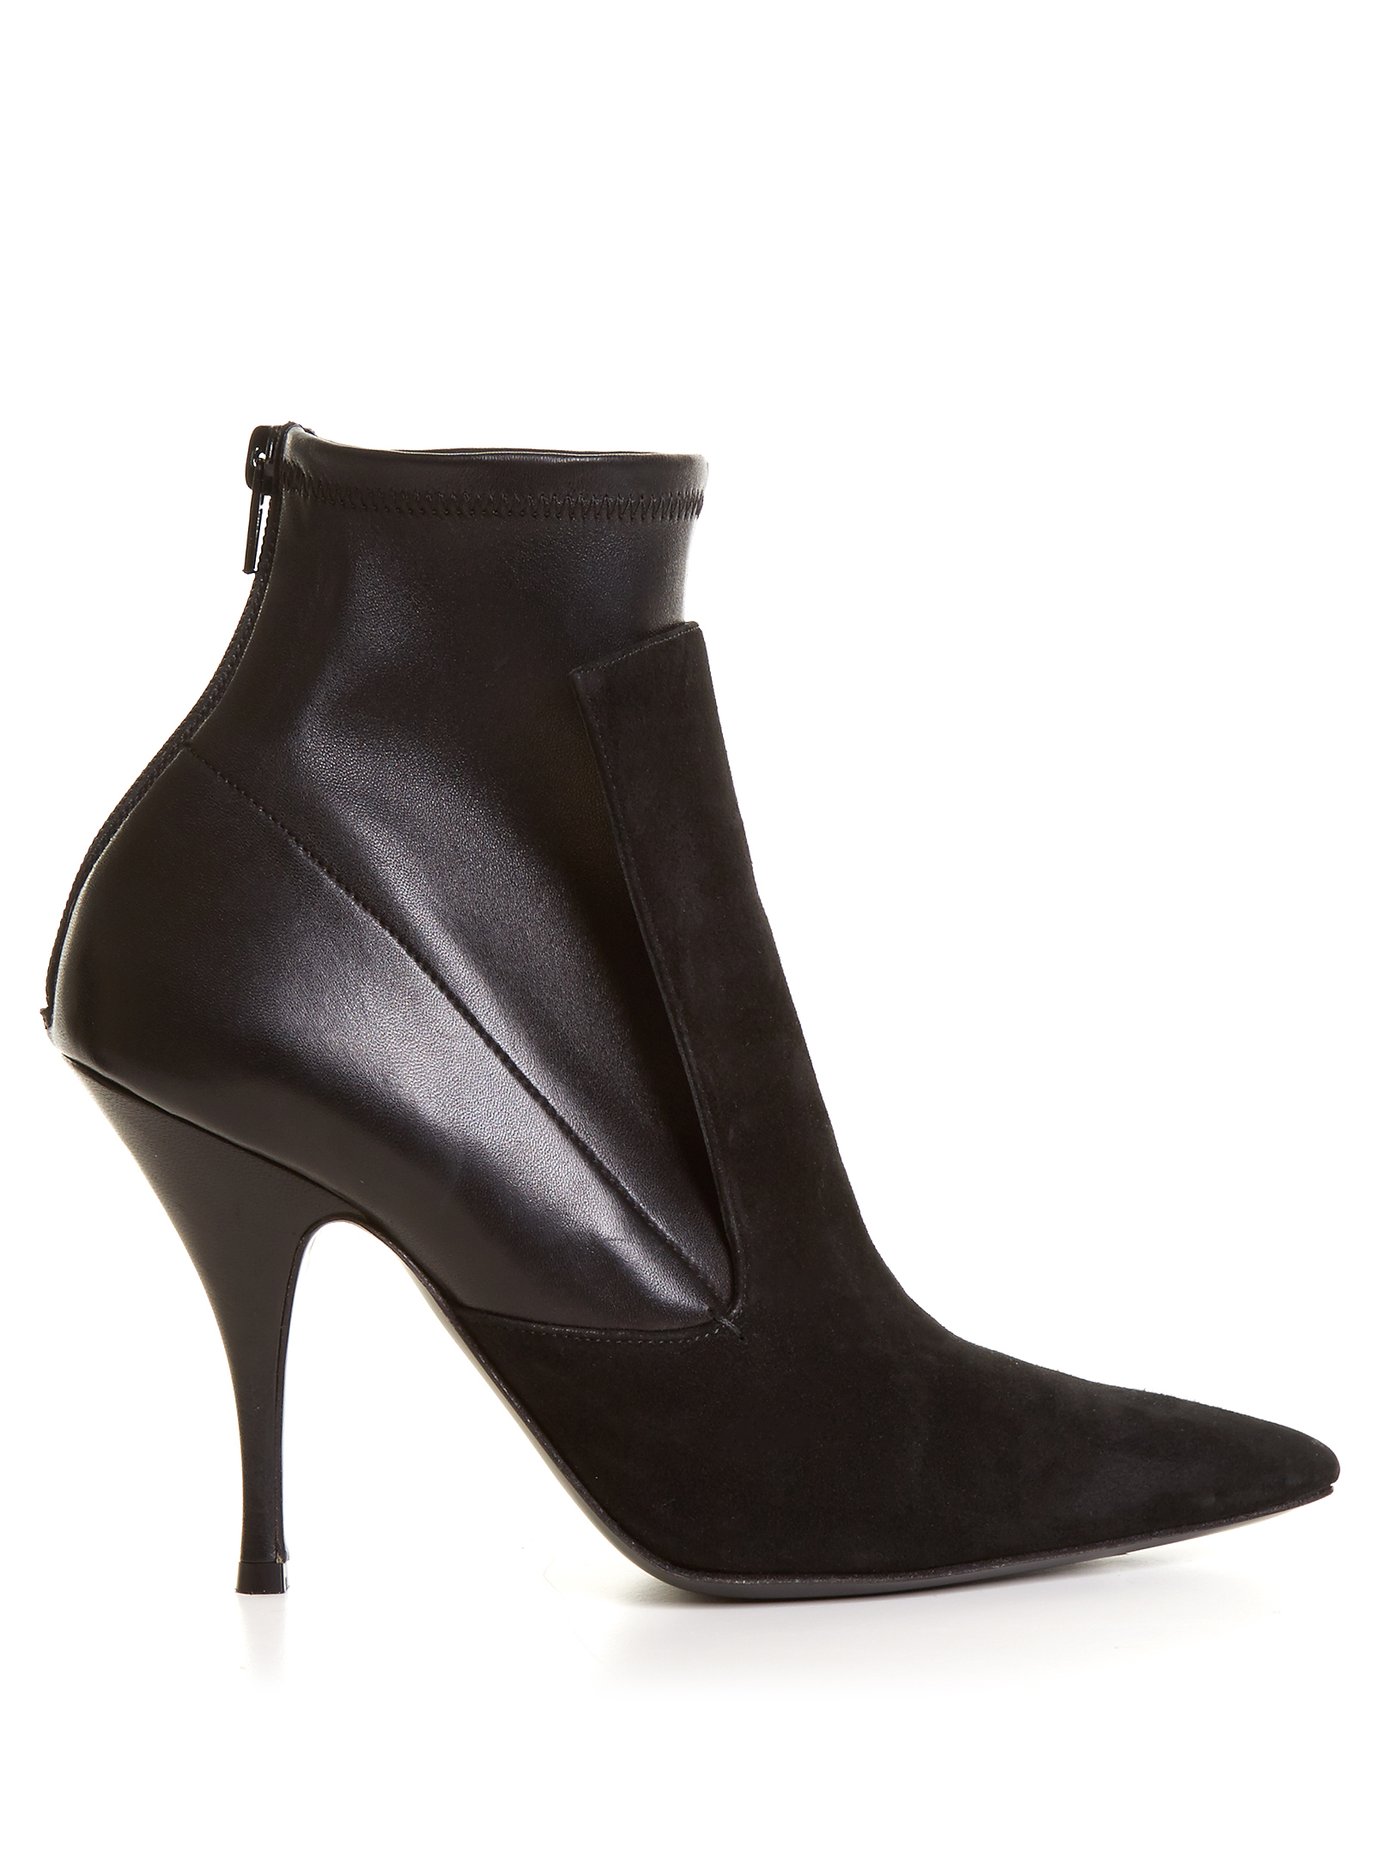 leather high heel ankle boots